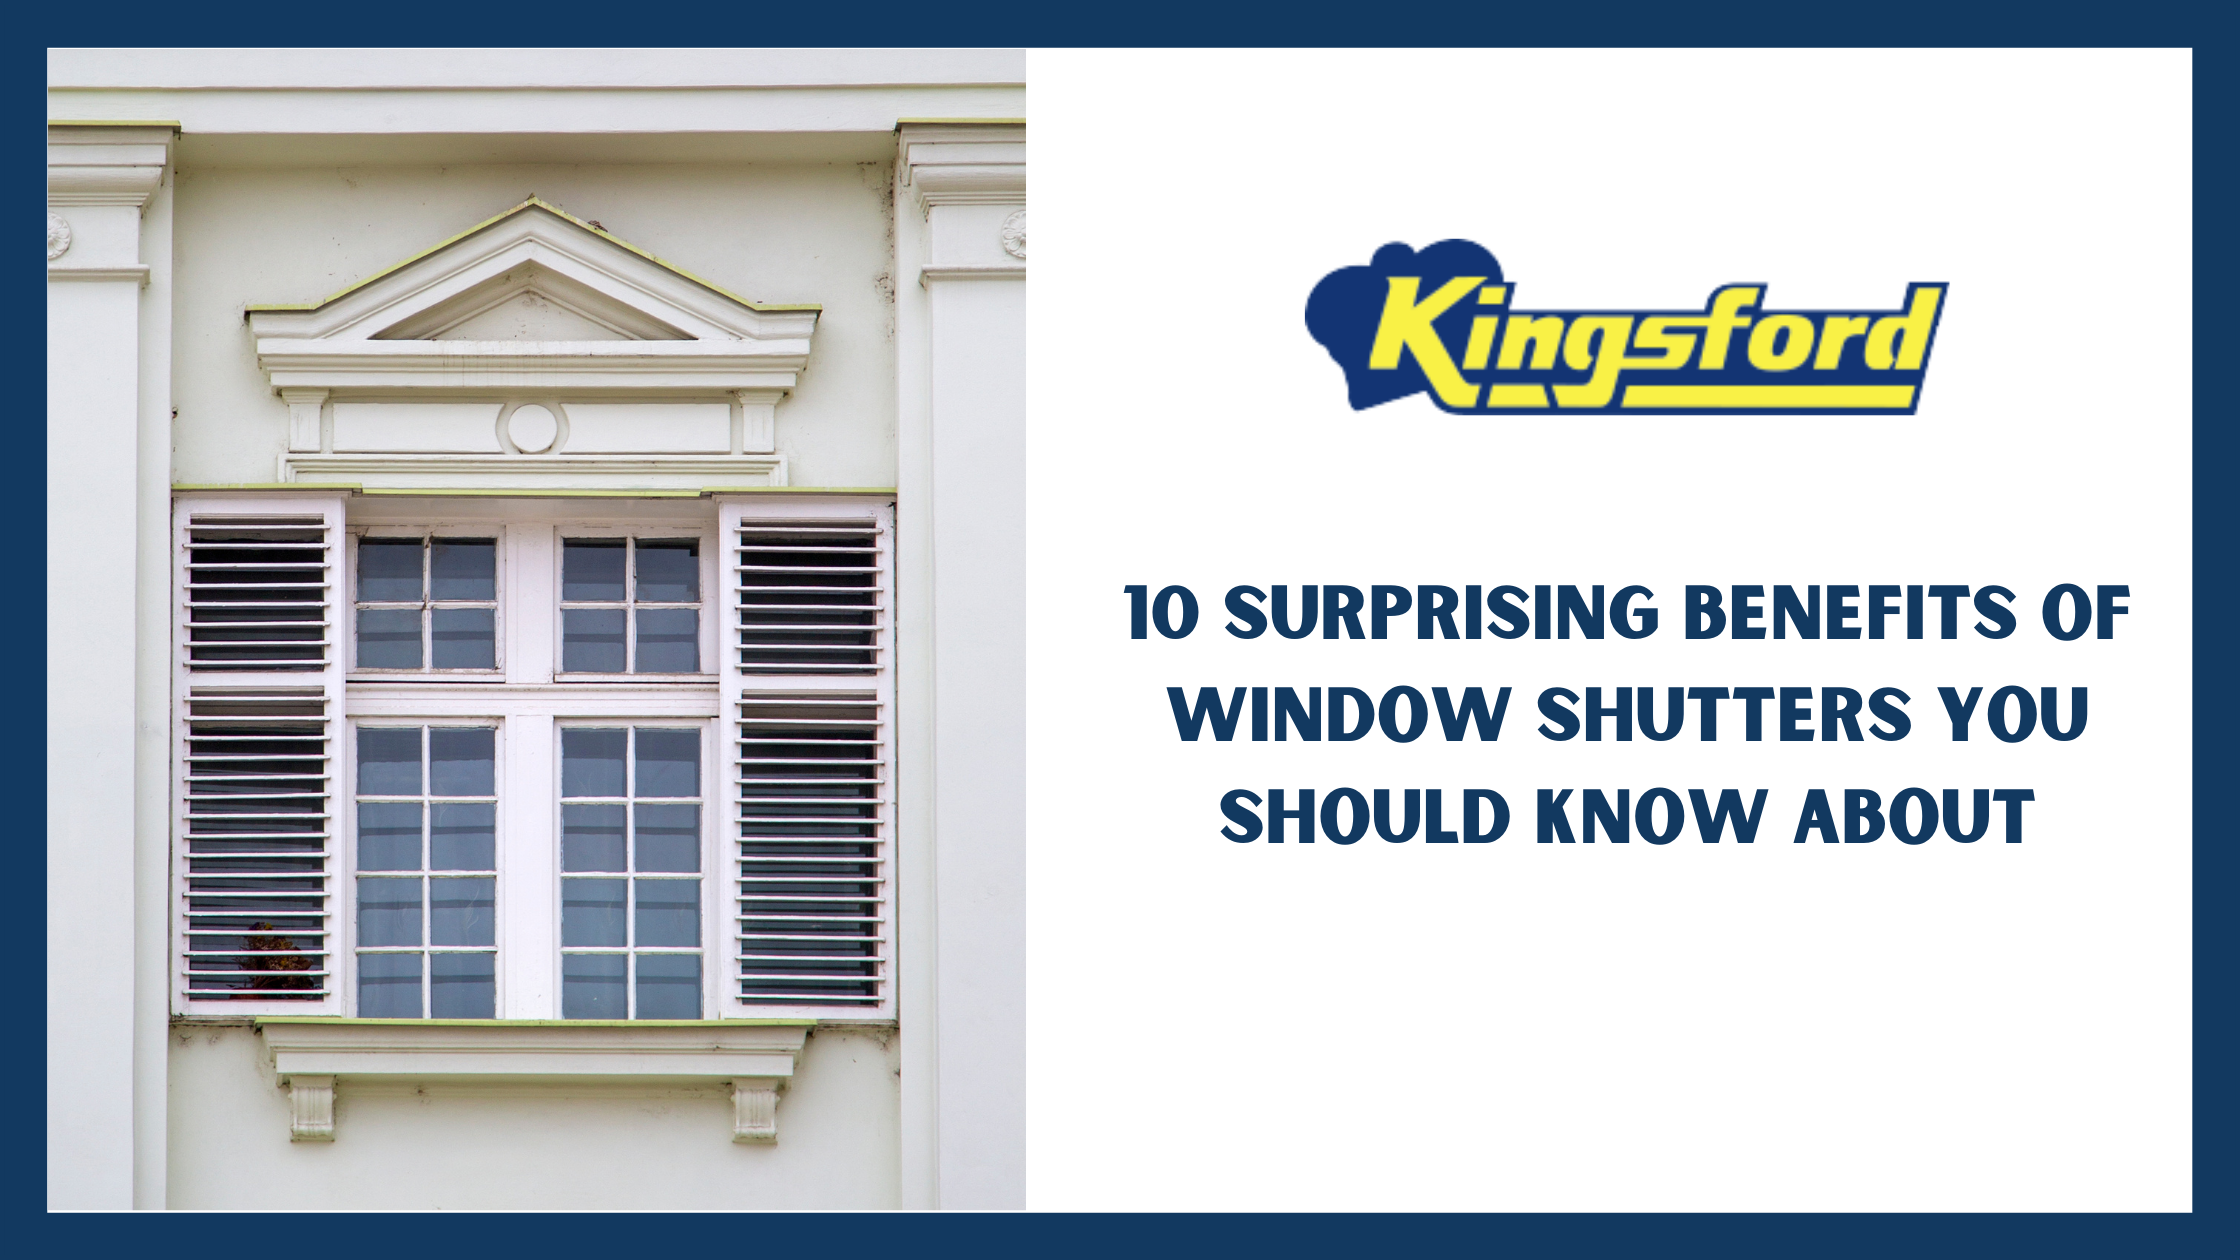 10 Surprising Benefits of Window Shutters You Should Know About